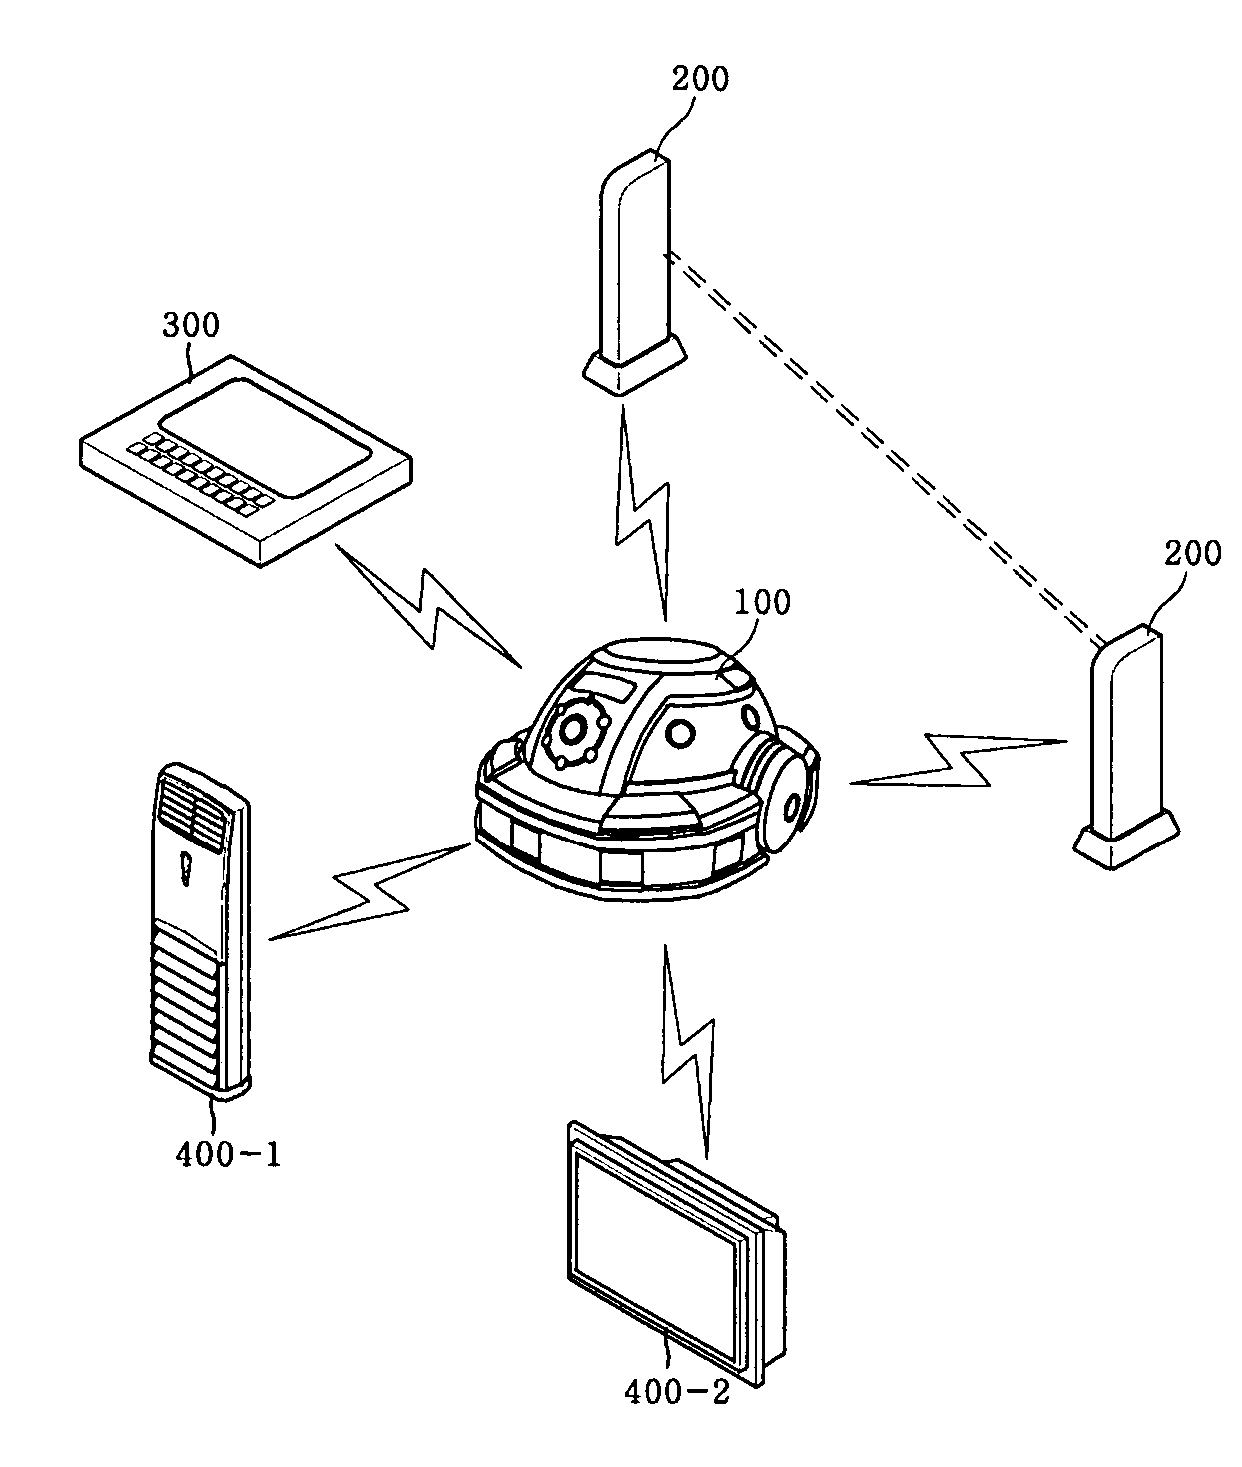 Home networking system using self-moving robot